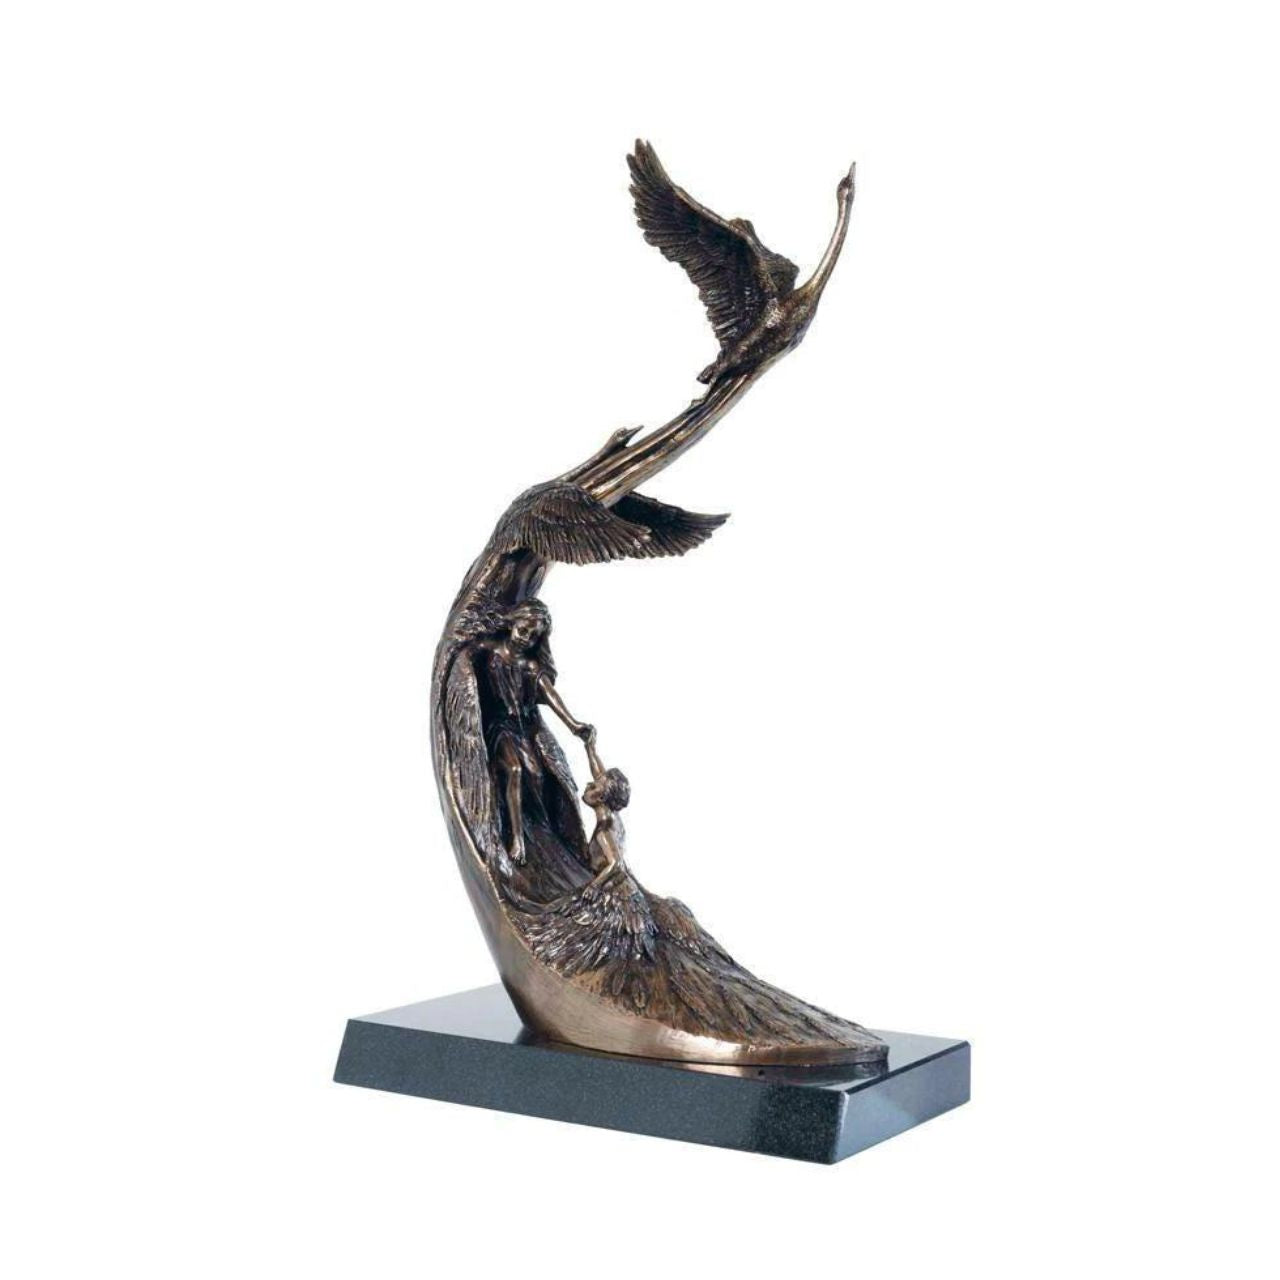 Genesis  Children of Lir  This is the latest in the Children of Lir, which was introduced in 2013. It is a stunning piece set on a marble base.